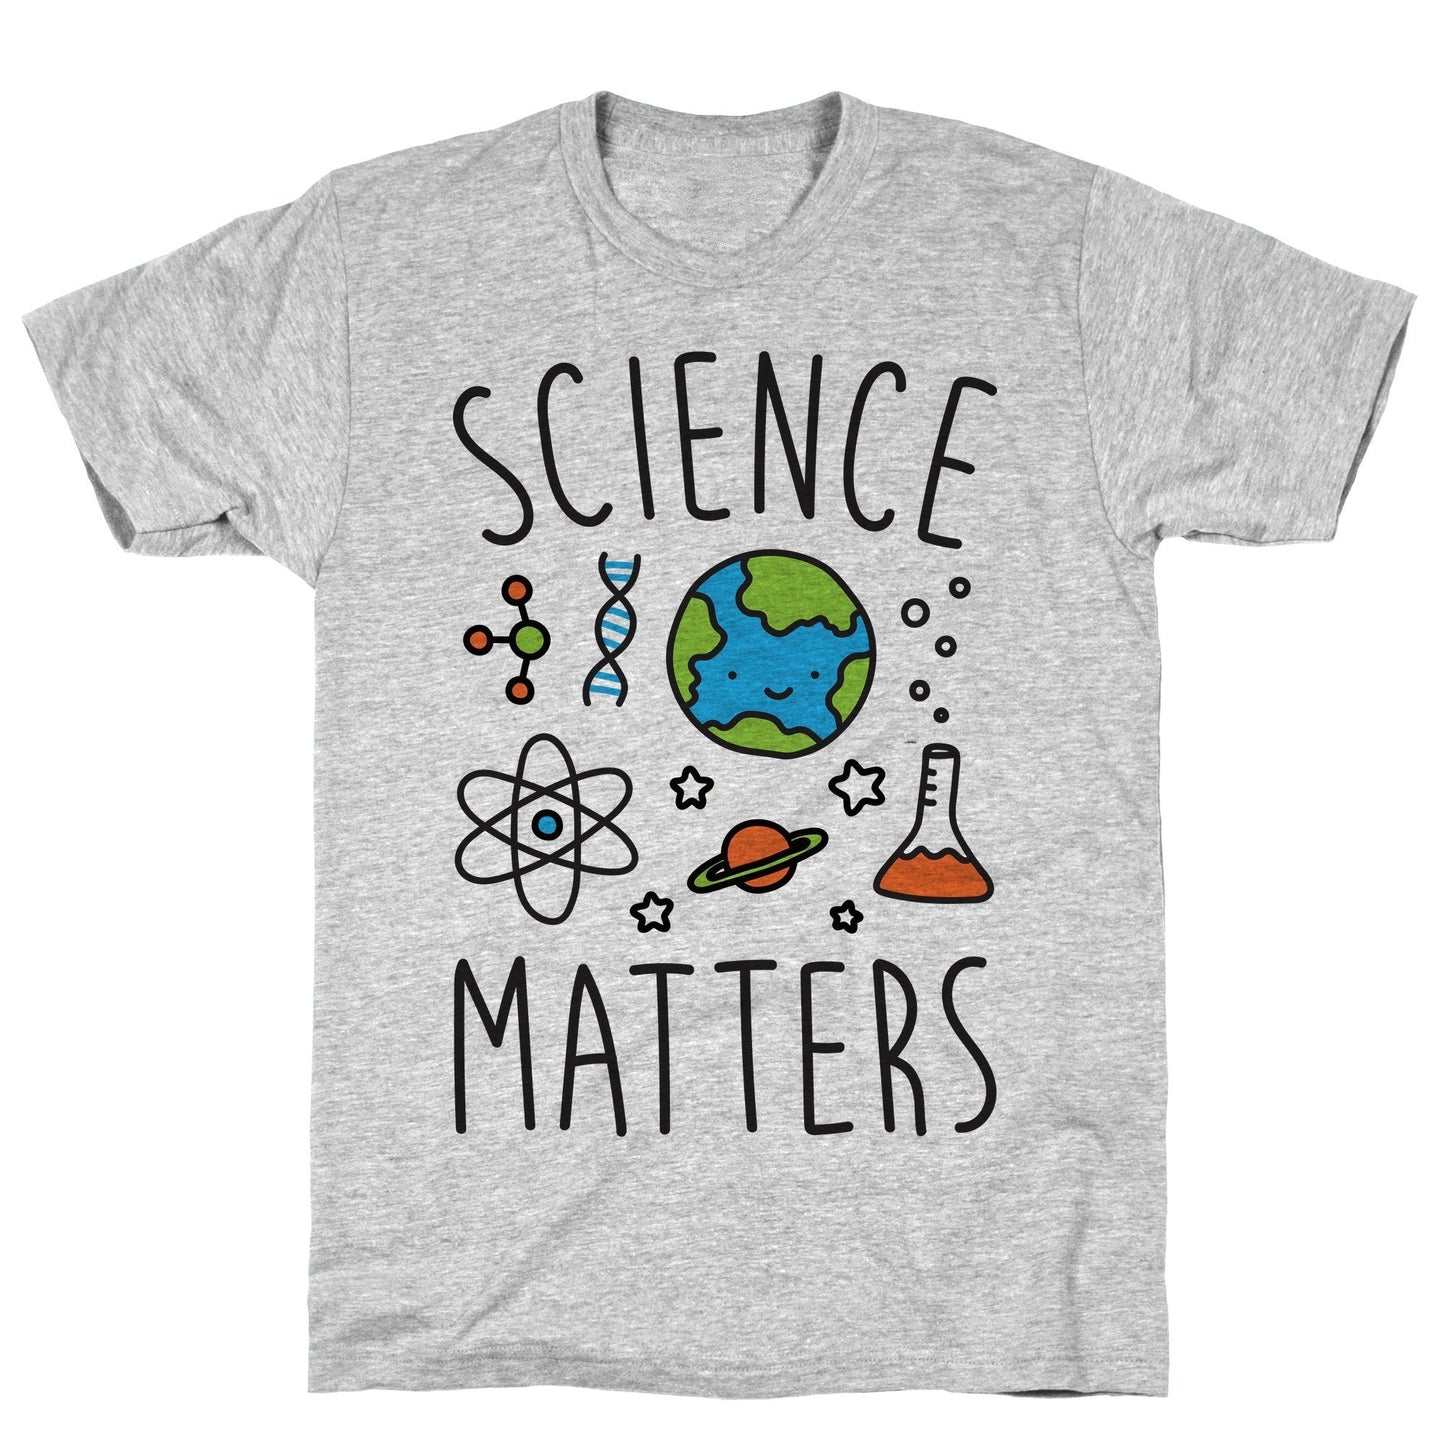 Science Matters Athletic Gray Unisex Cotton Tee